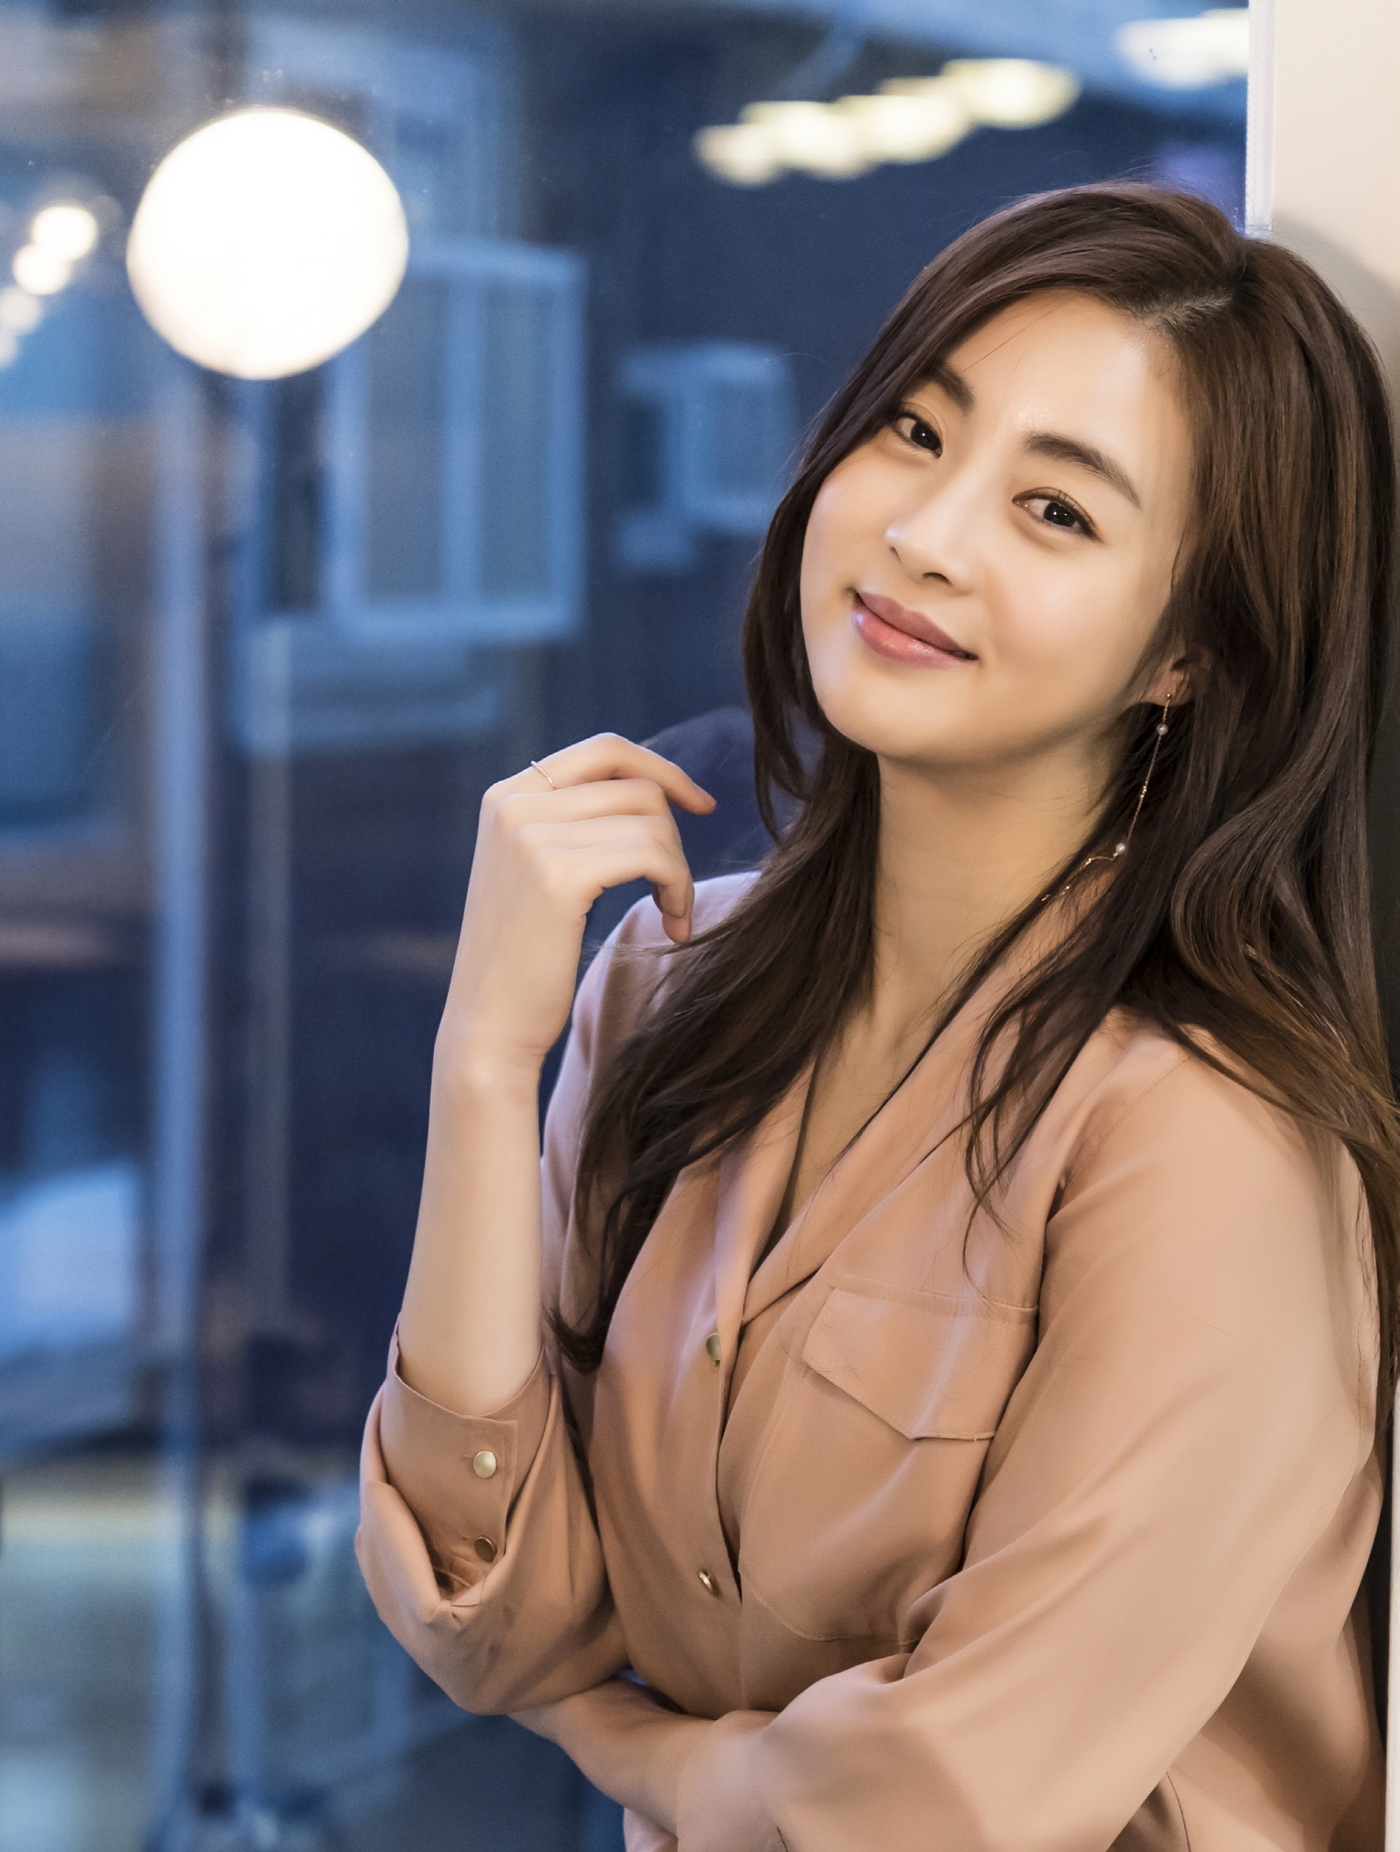 Actor Kang So-ra is pregnant with her first child